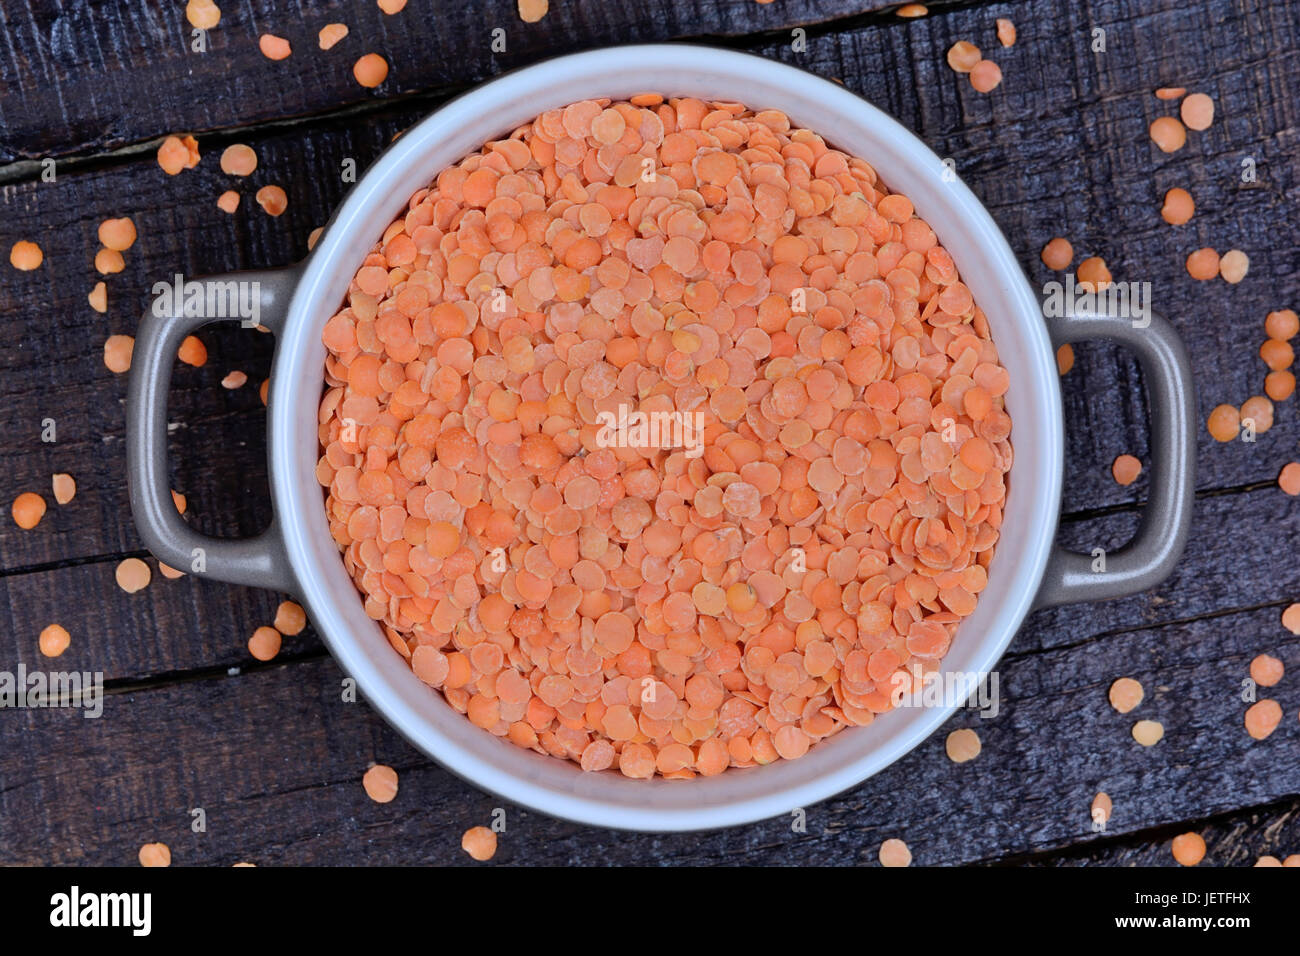 Red lentils in a ceramic pot on wooden background Stock Photo